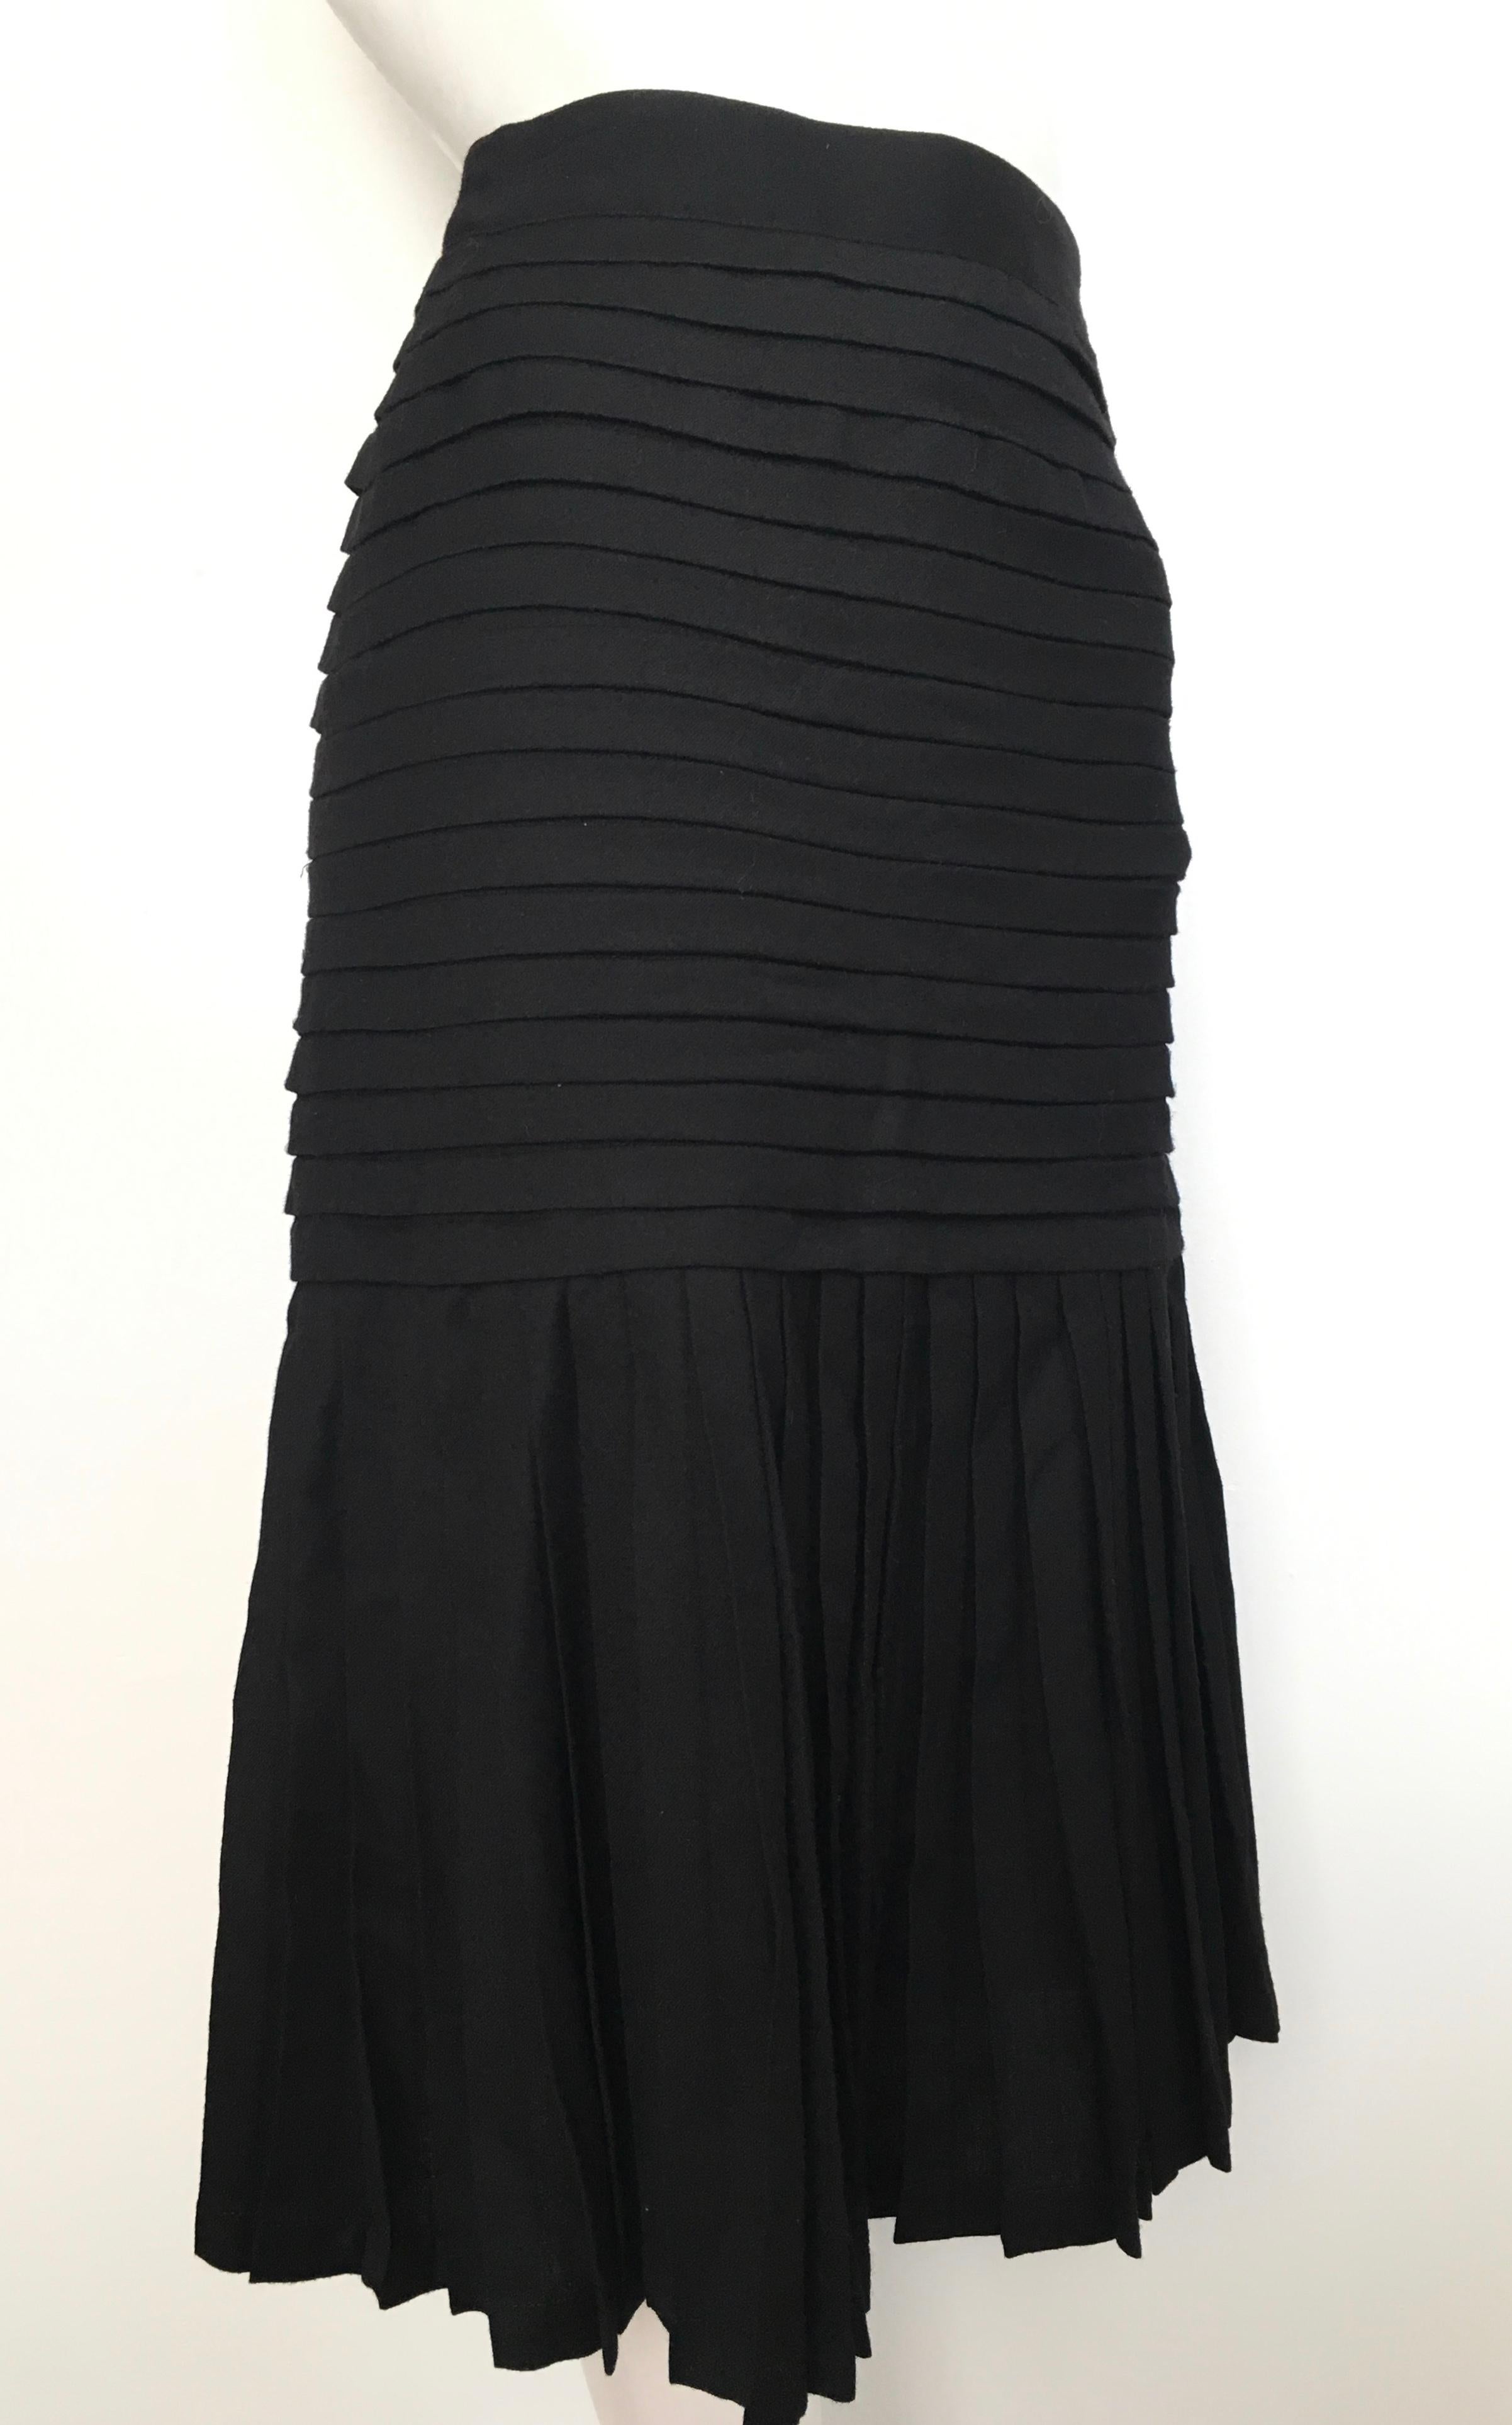 Women's or Men's Genny Black Wool Pleated Skirt Size 6. For Sale